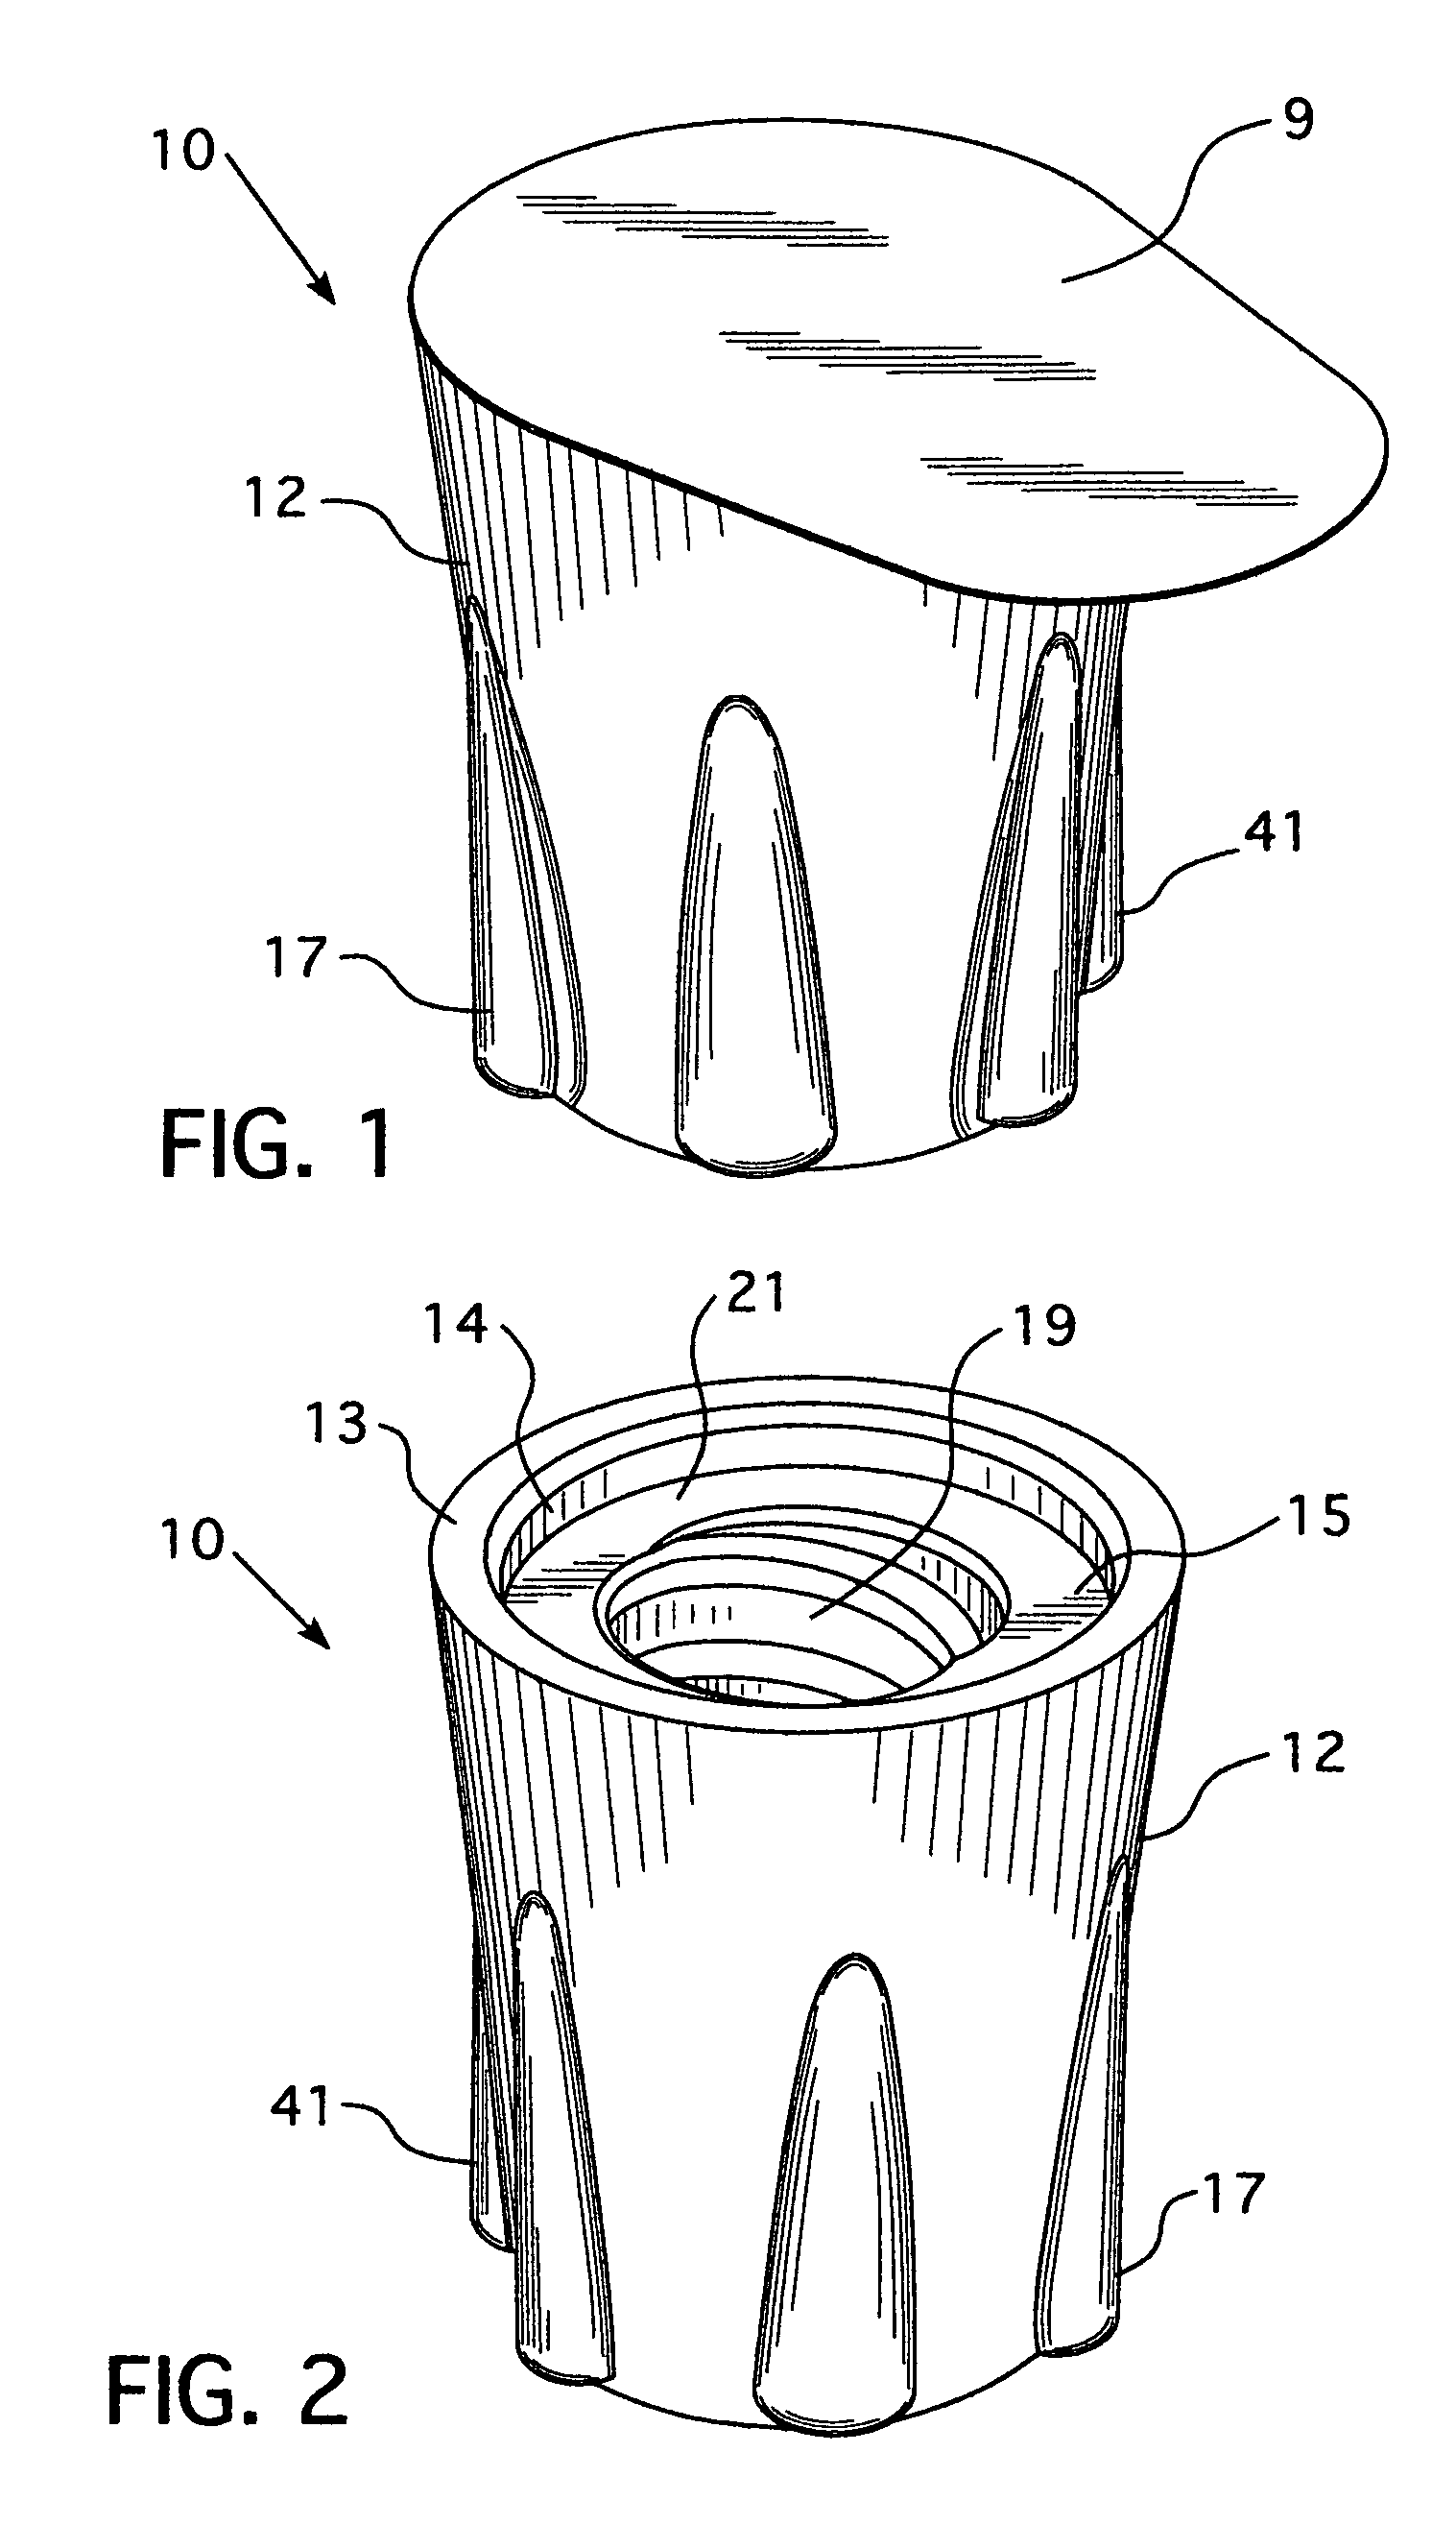 Apparatus and method for sterilizing a tubular medical line port